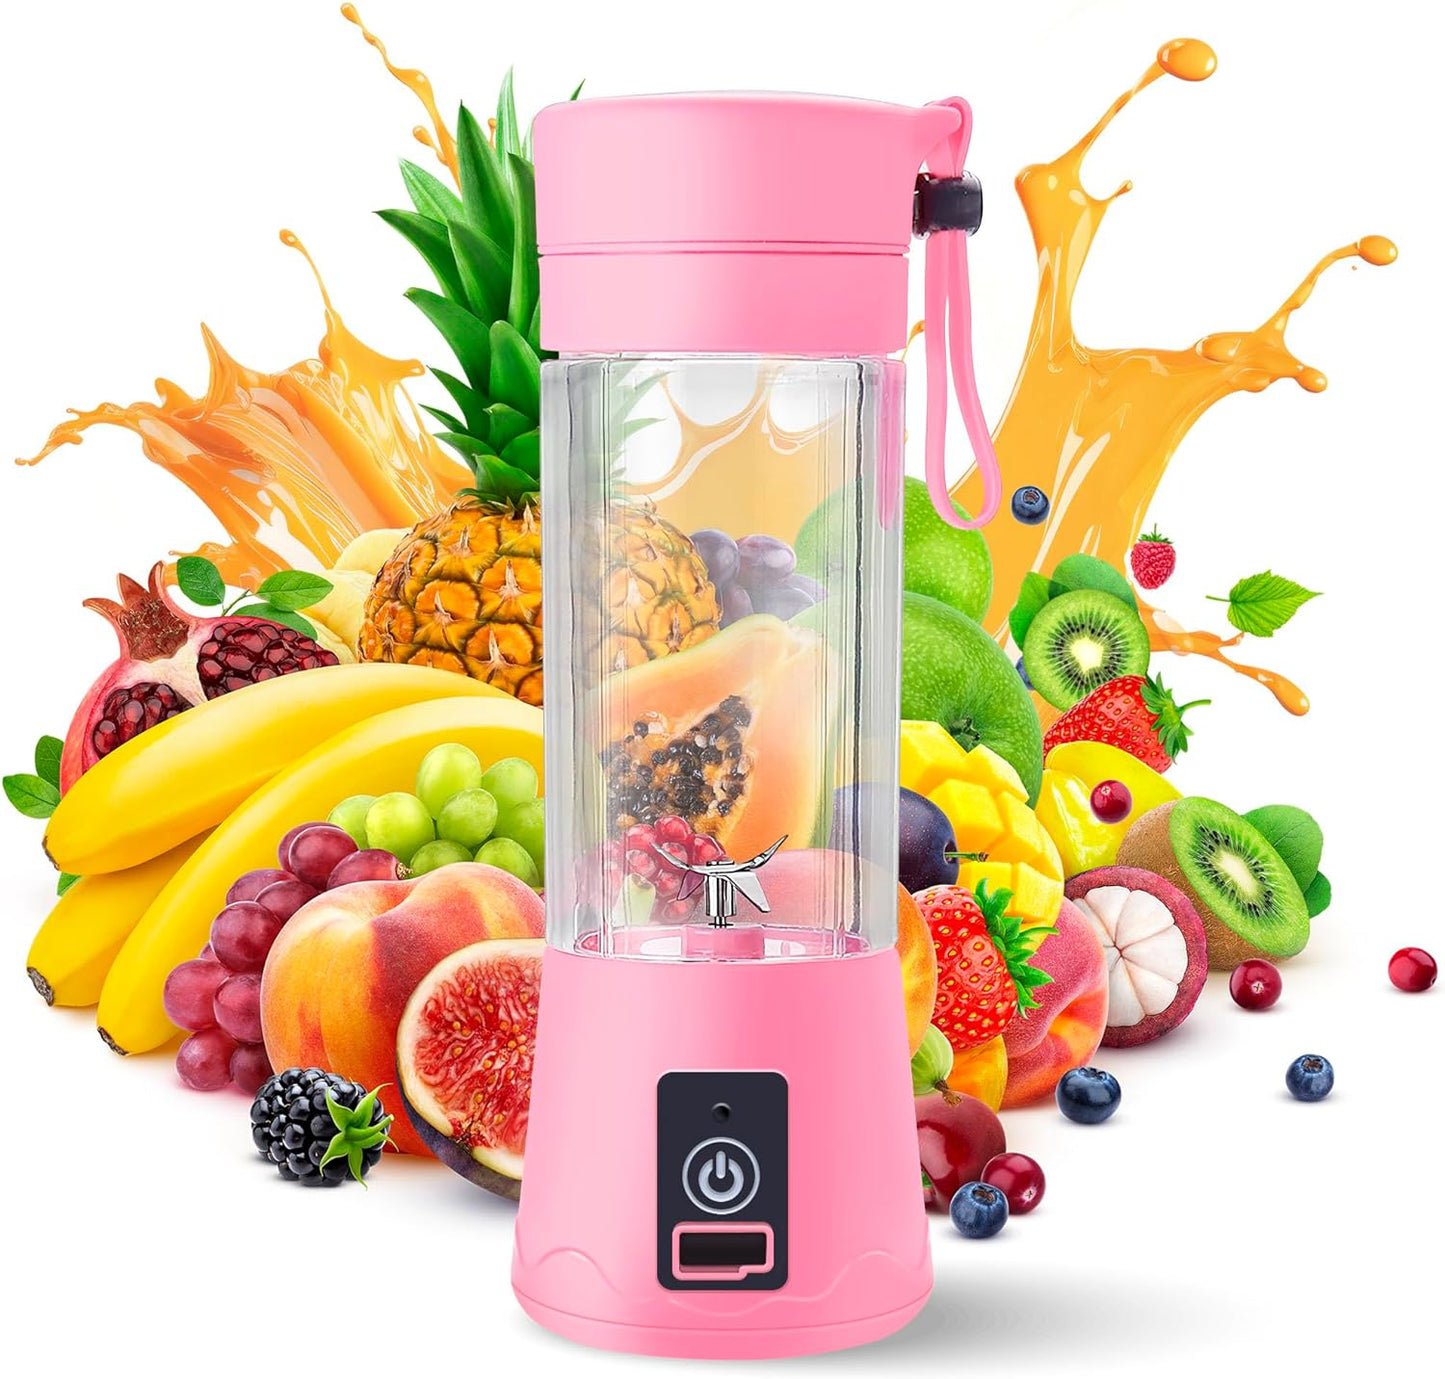 Portable Blender - Compact and USB Rechargeable Personal Travel Blenders for Smoothies, Shakes and Ice - Mini Fruit Juice Mixing Shaker Bottle - 380Ml, Purple  Nomadic Outpost Pink  